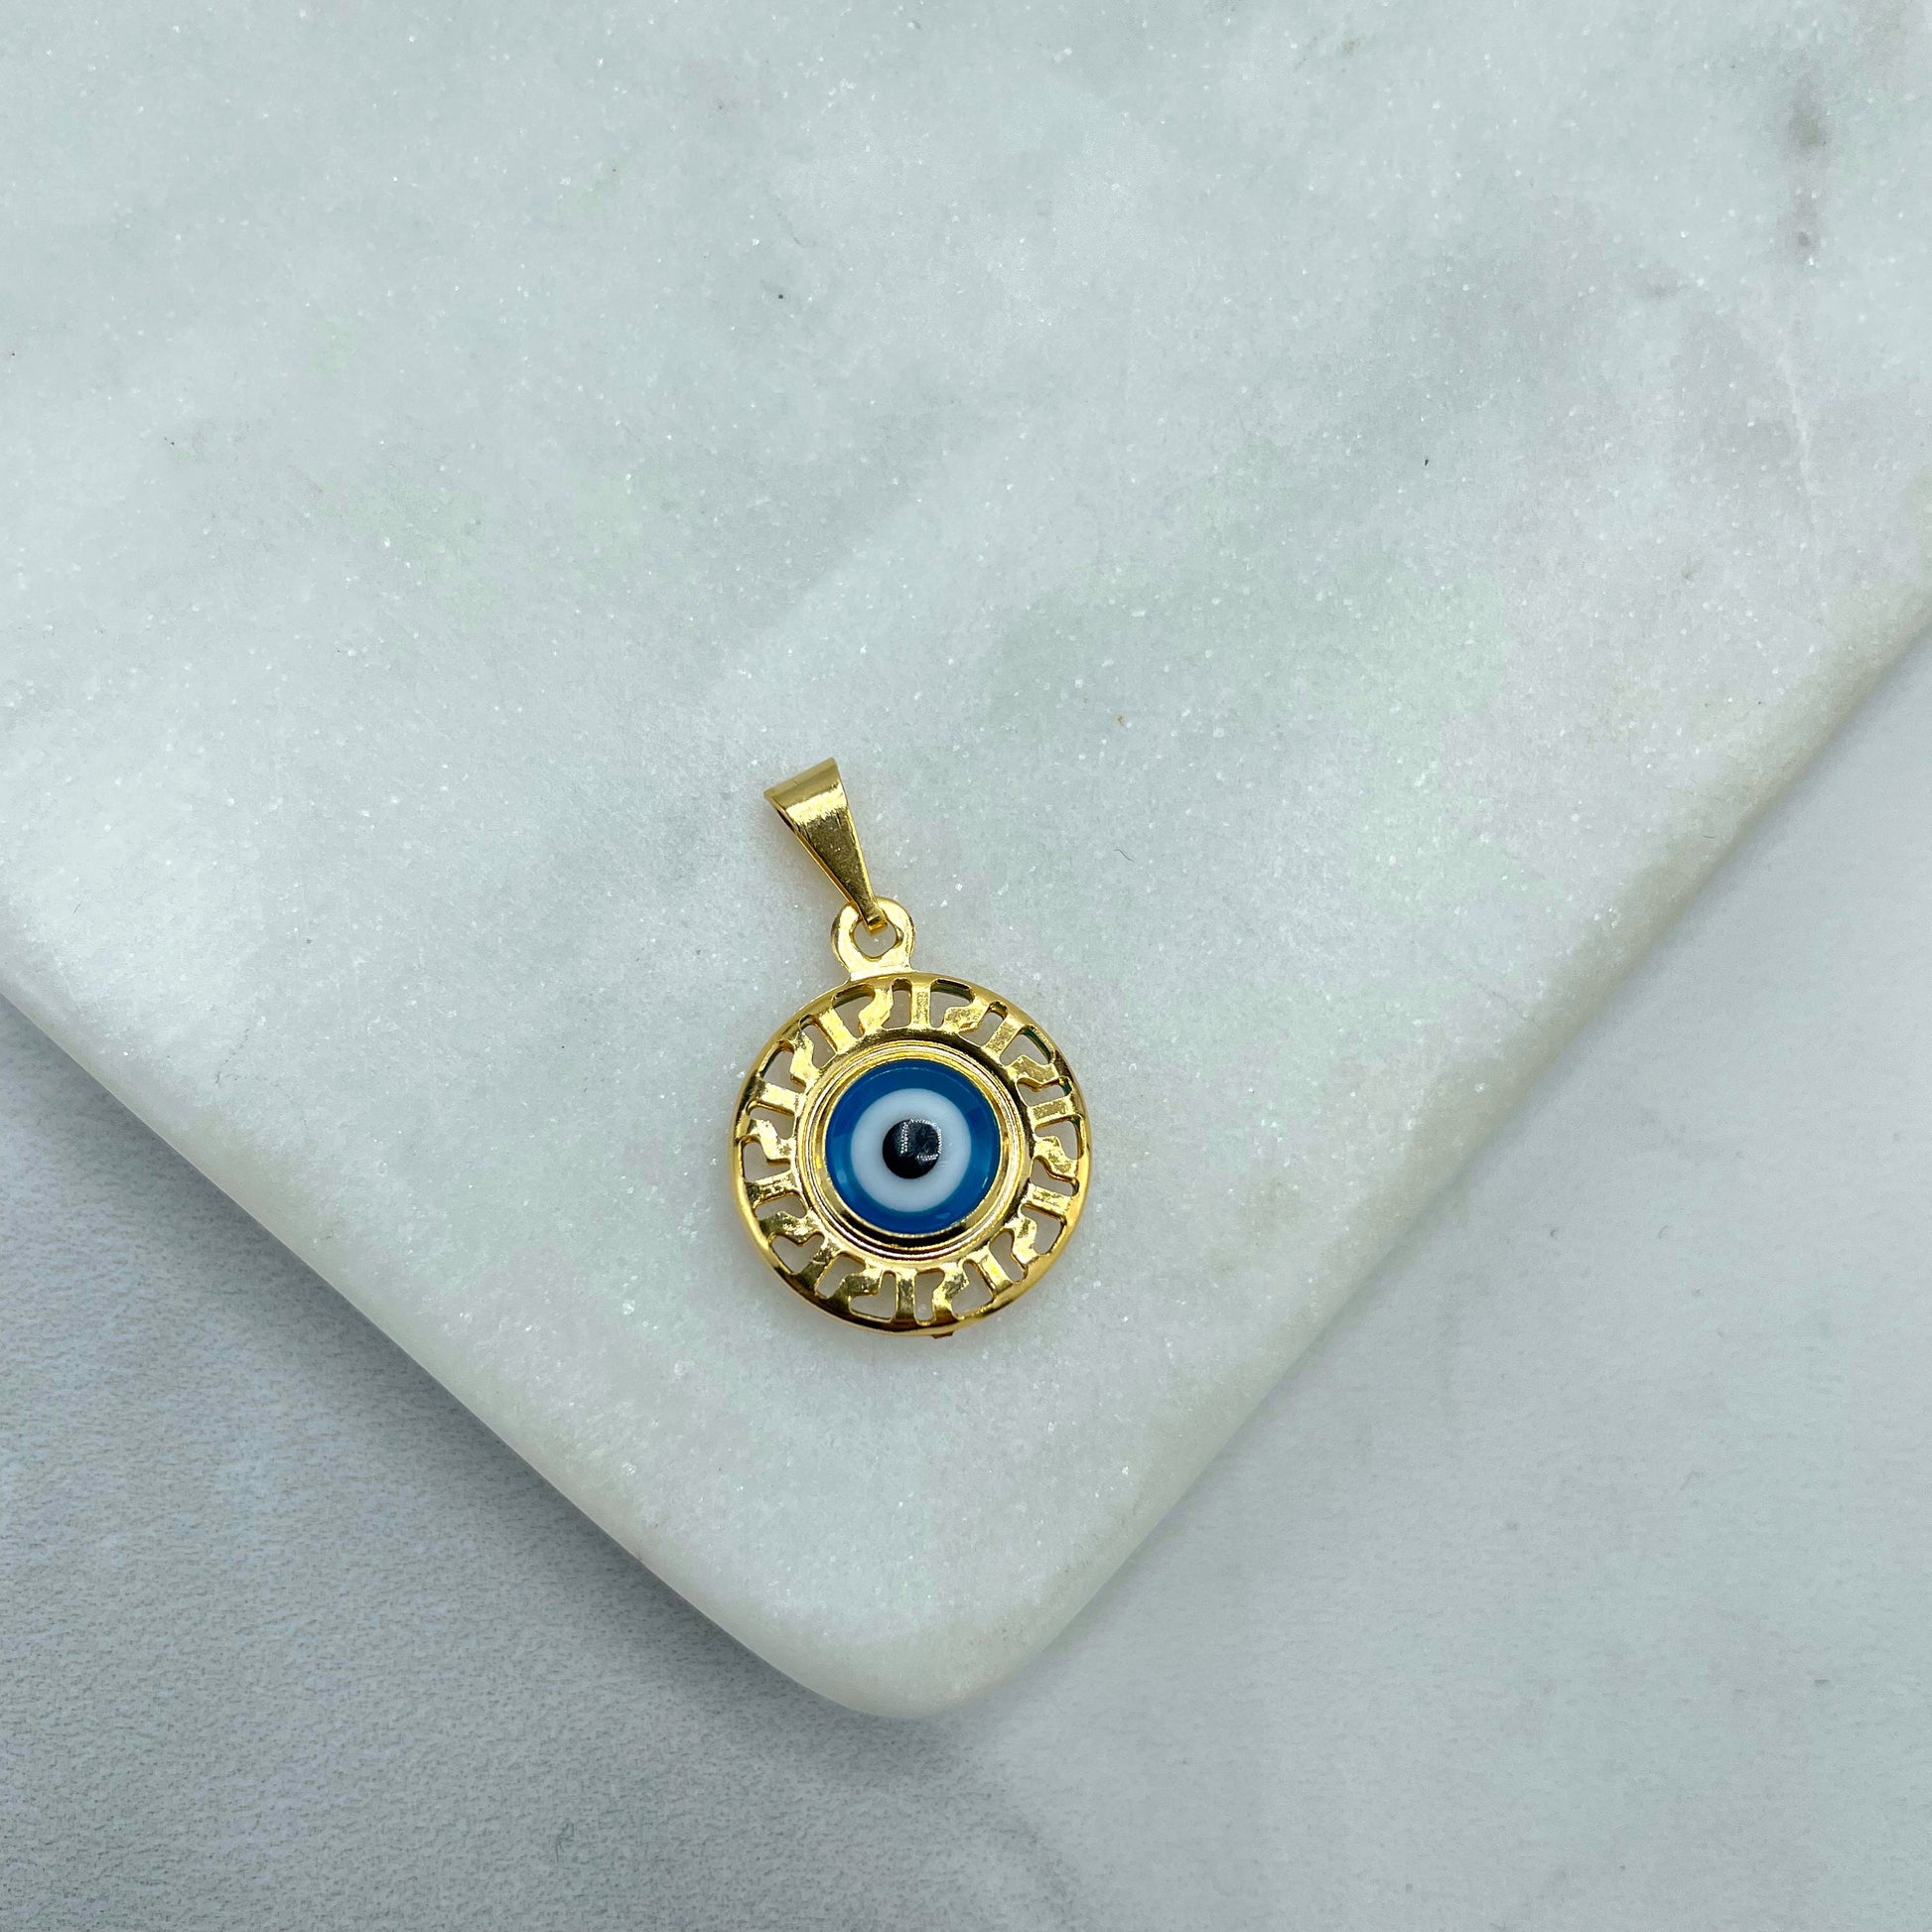 18k Gold Filled Blue Enamel Evil Eye, Greek Eye with Ethnic Details Circle Charm Pendant, Luck & Protection Coin Amulet, Wholesale Jewelry